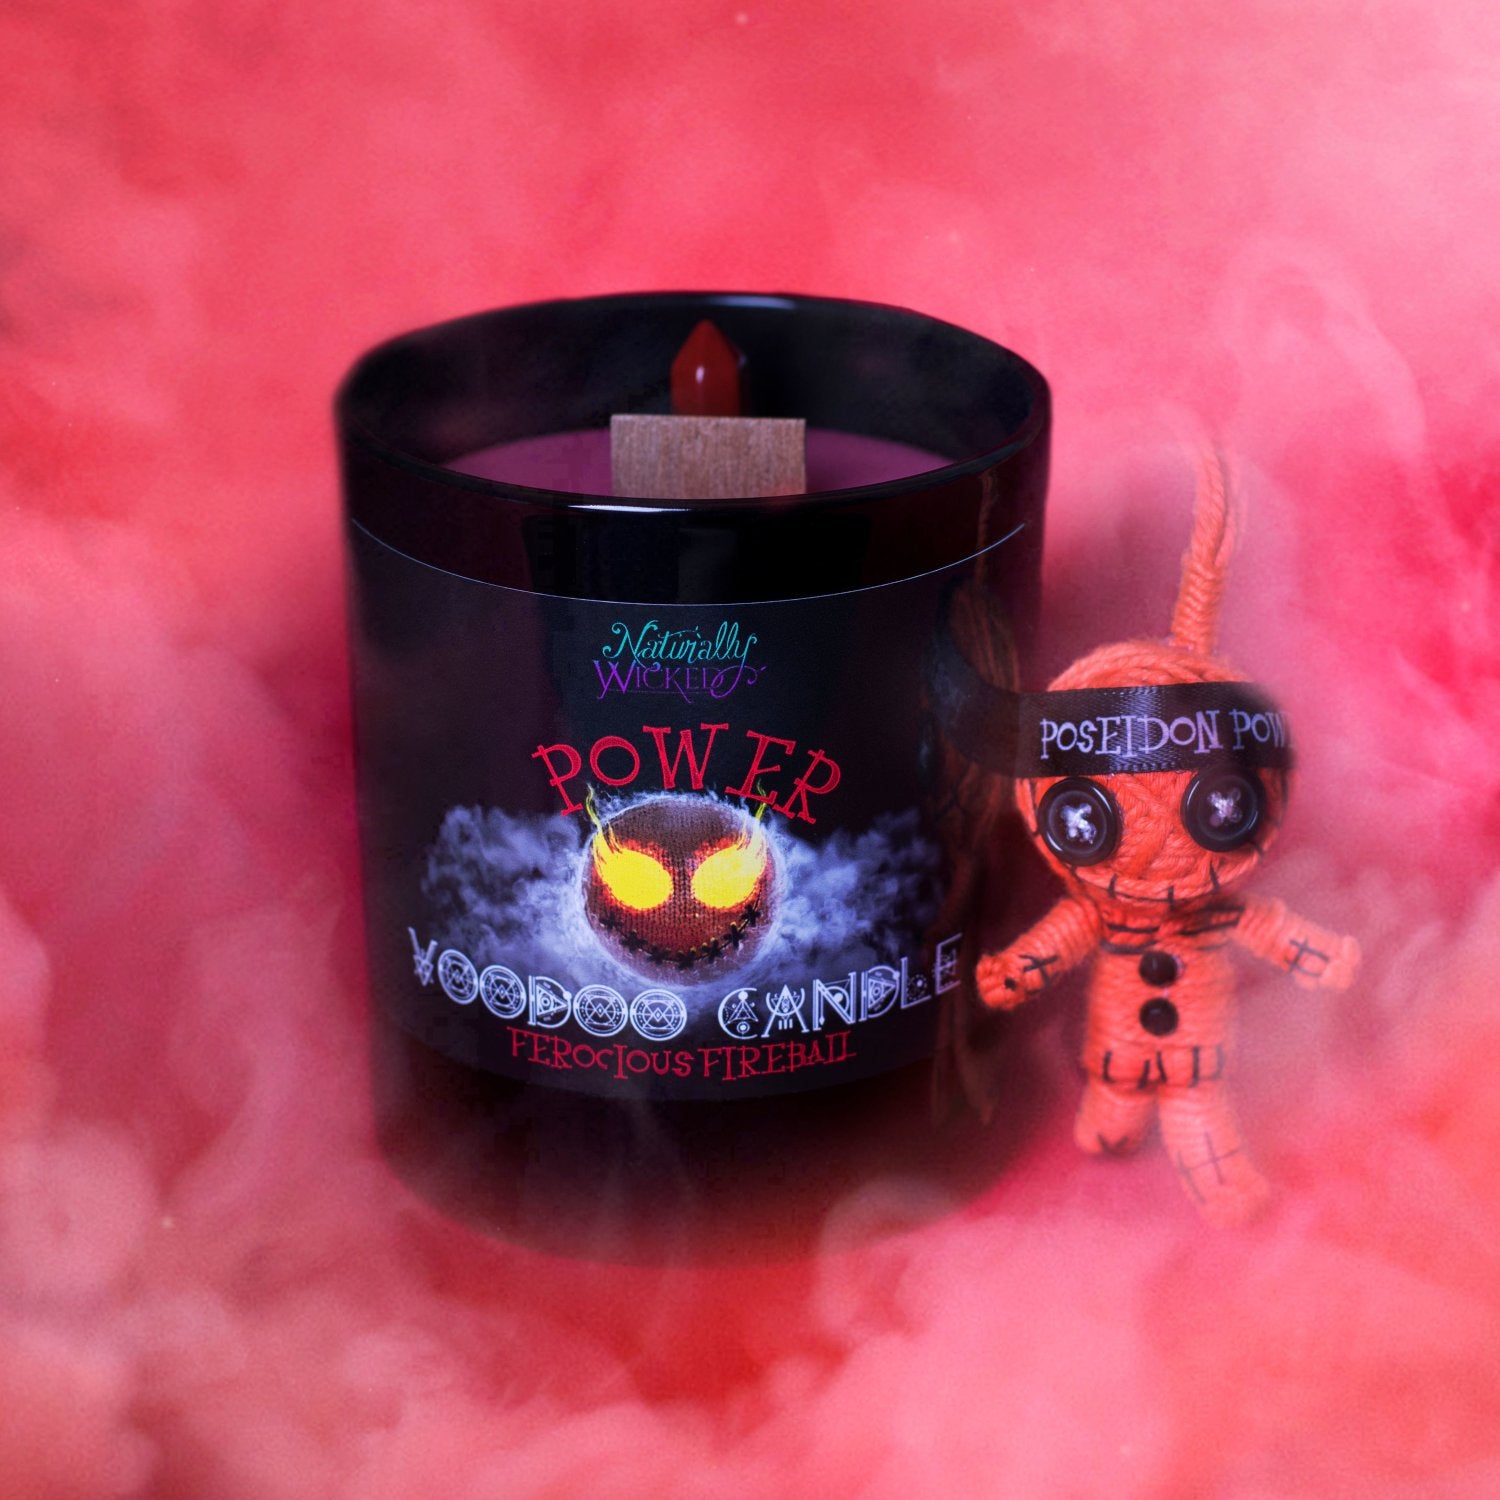 Naturally Wicked Voodoo Power Spell Candle Alongside Red Power Voodoo Doll; Poseidon Power